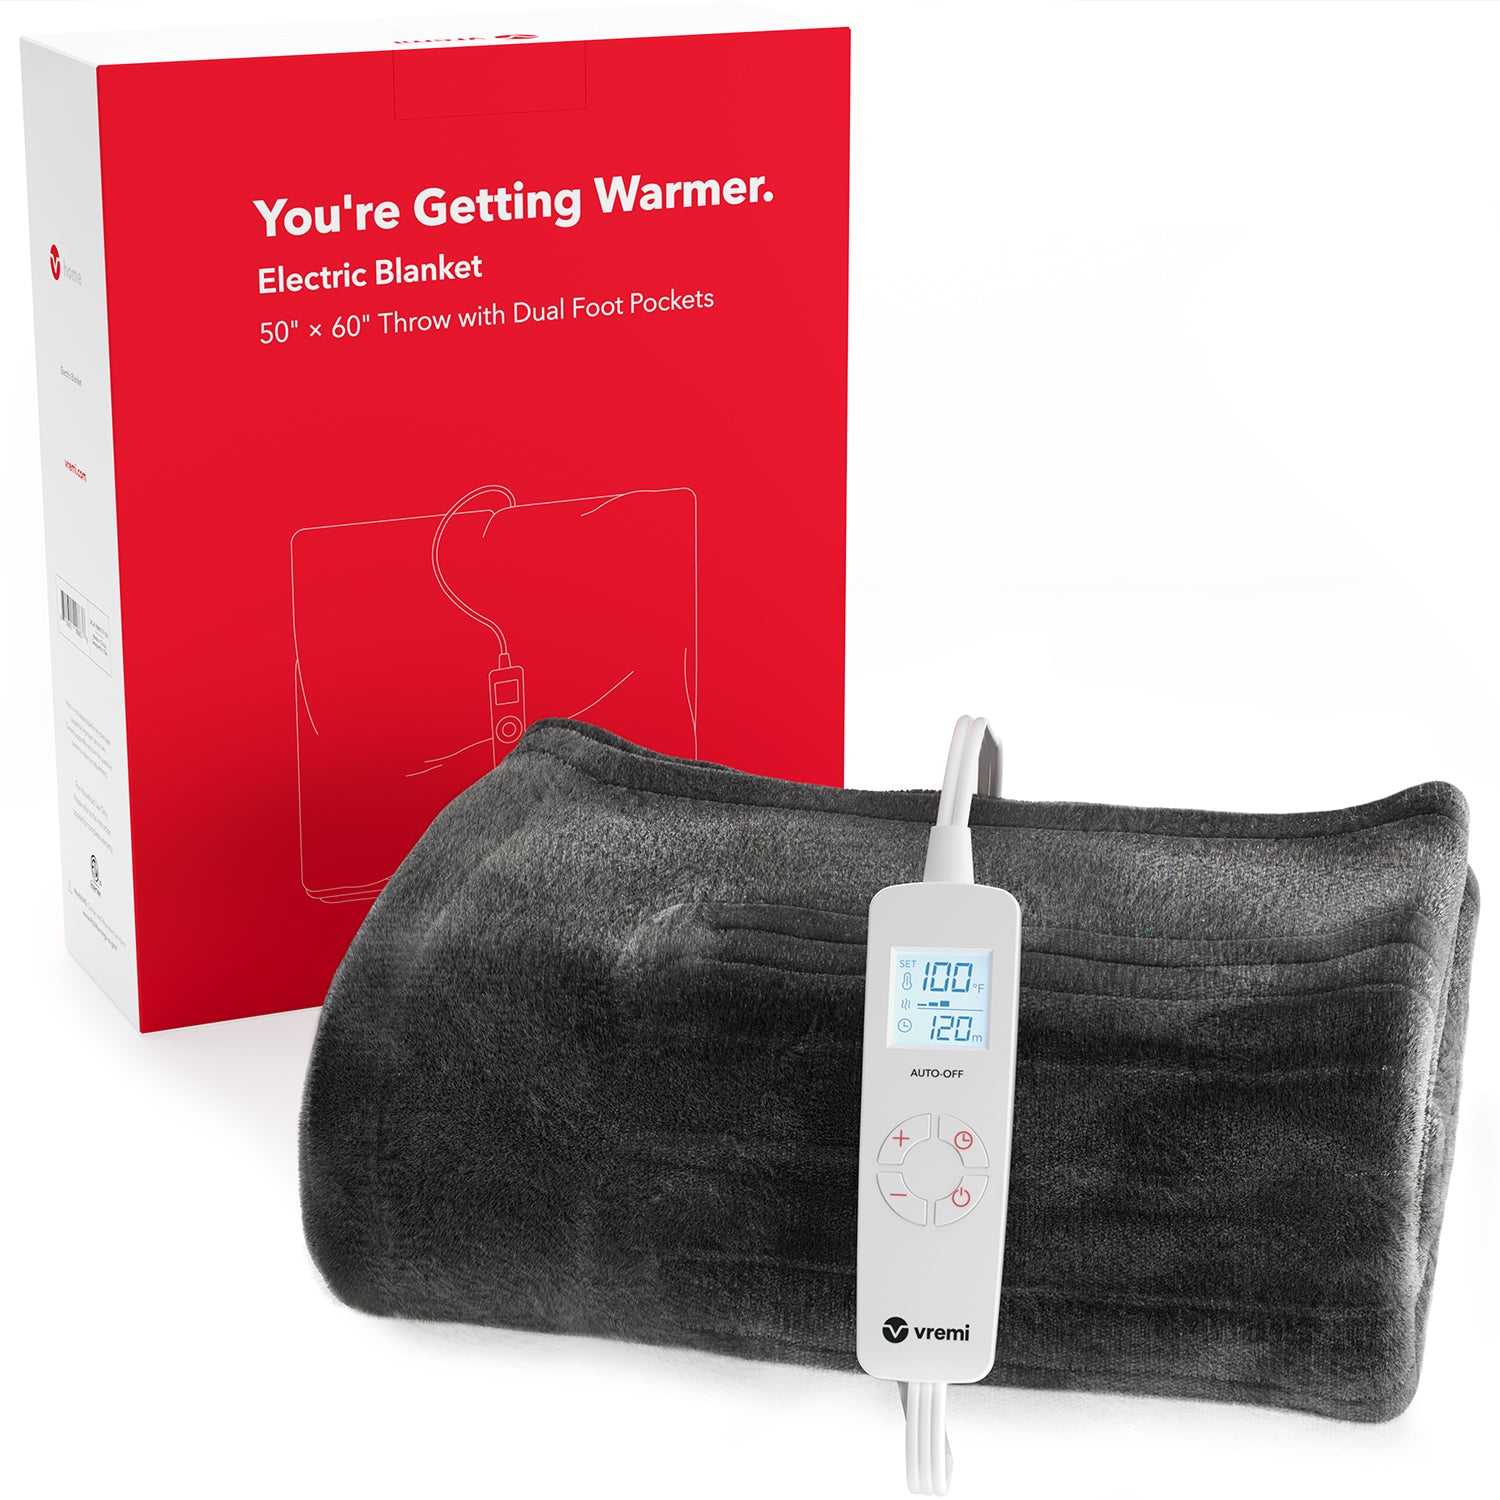 Electric Blanket with Dedicated Foot Warming Pockets